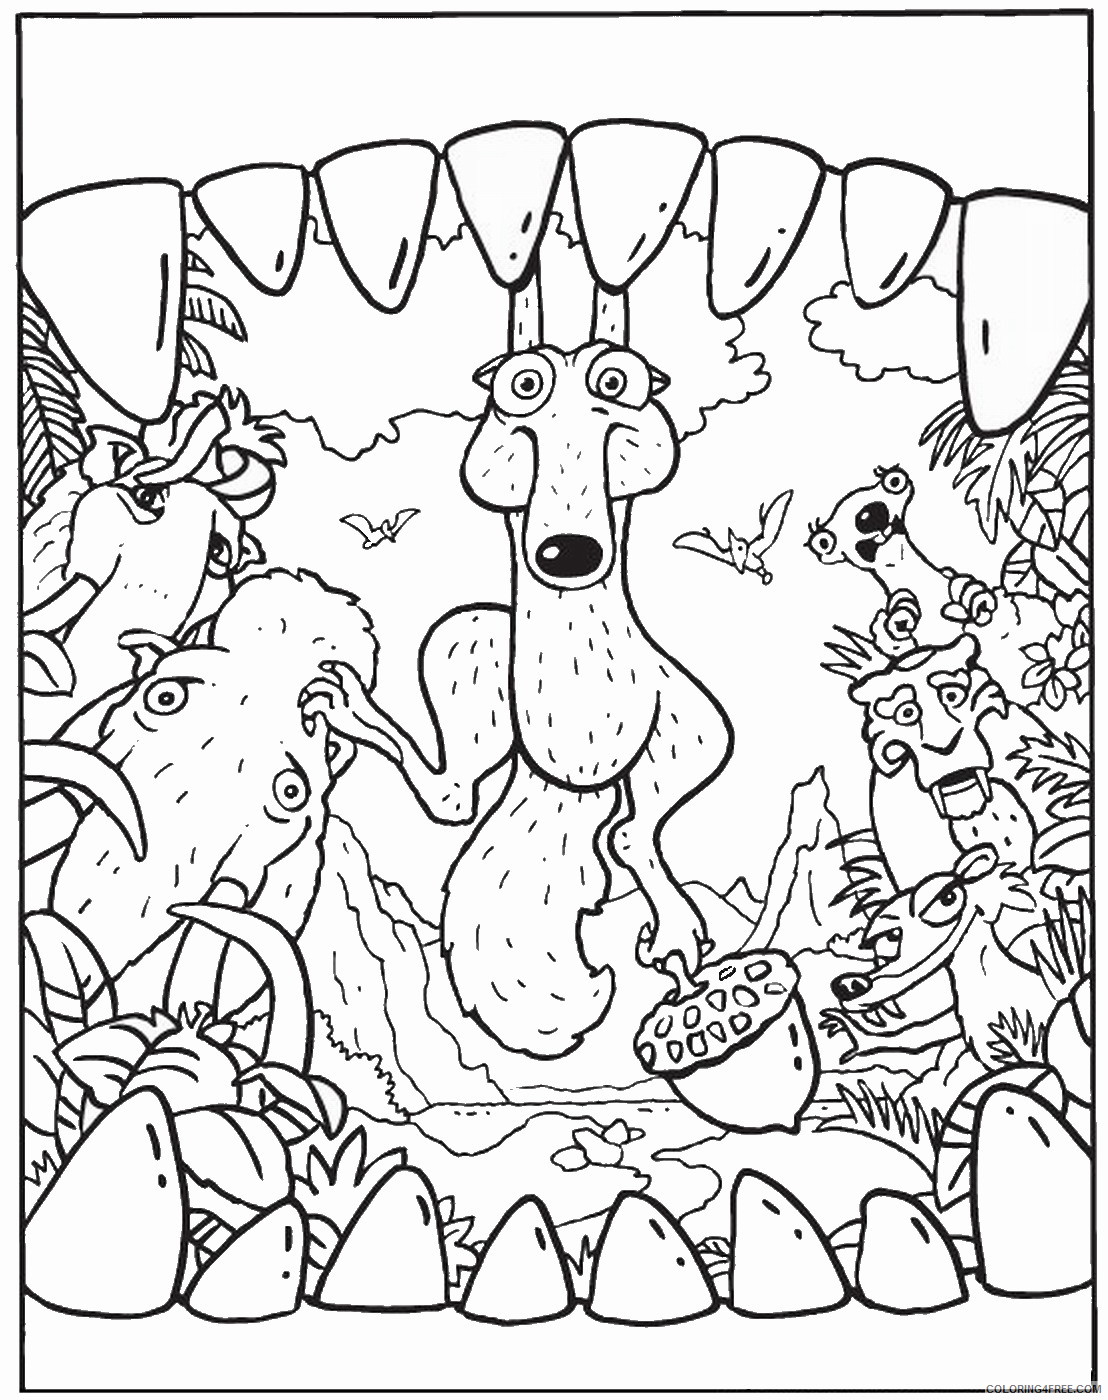 Ice Age Coloring Pages Cartoons ice age 35 Printable 2020 3401 Coloring4free